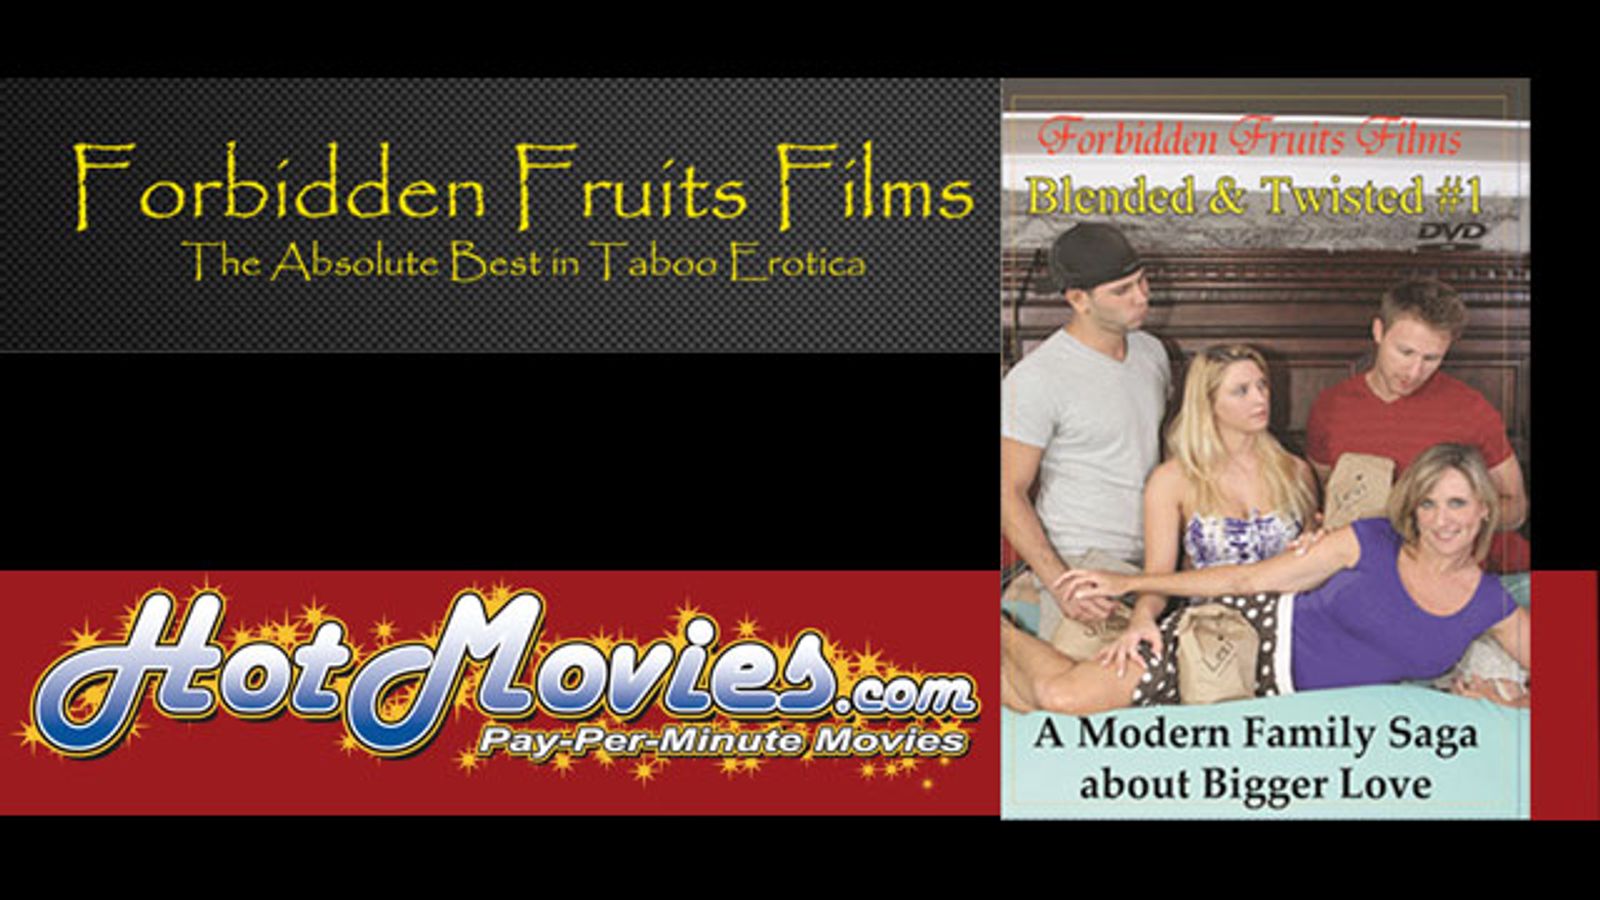 HotMovies Debuts 'Blended and Twisted' From Forbidden Fruits Films